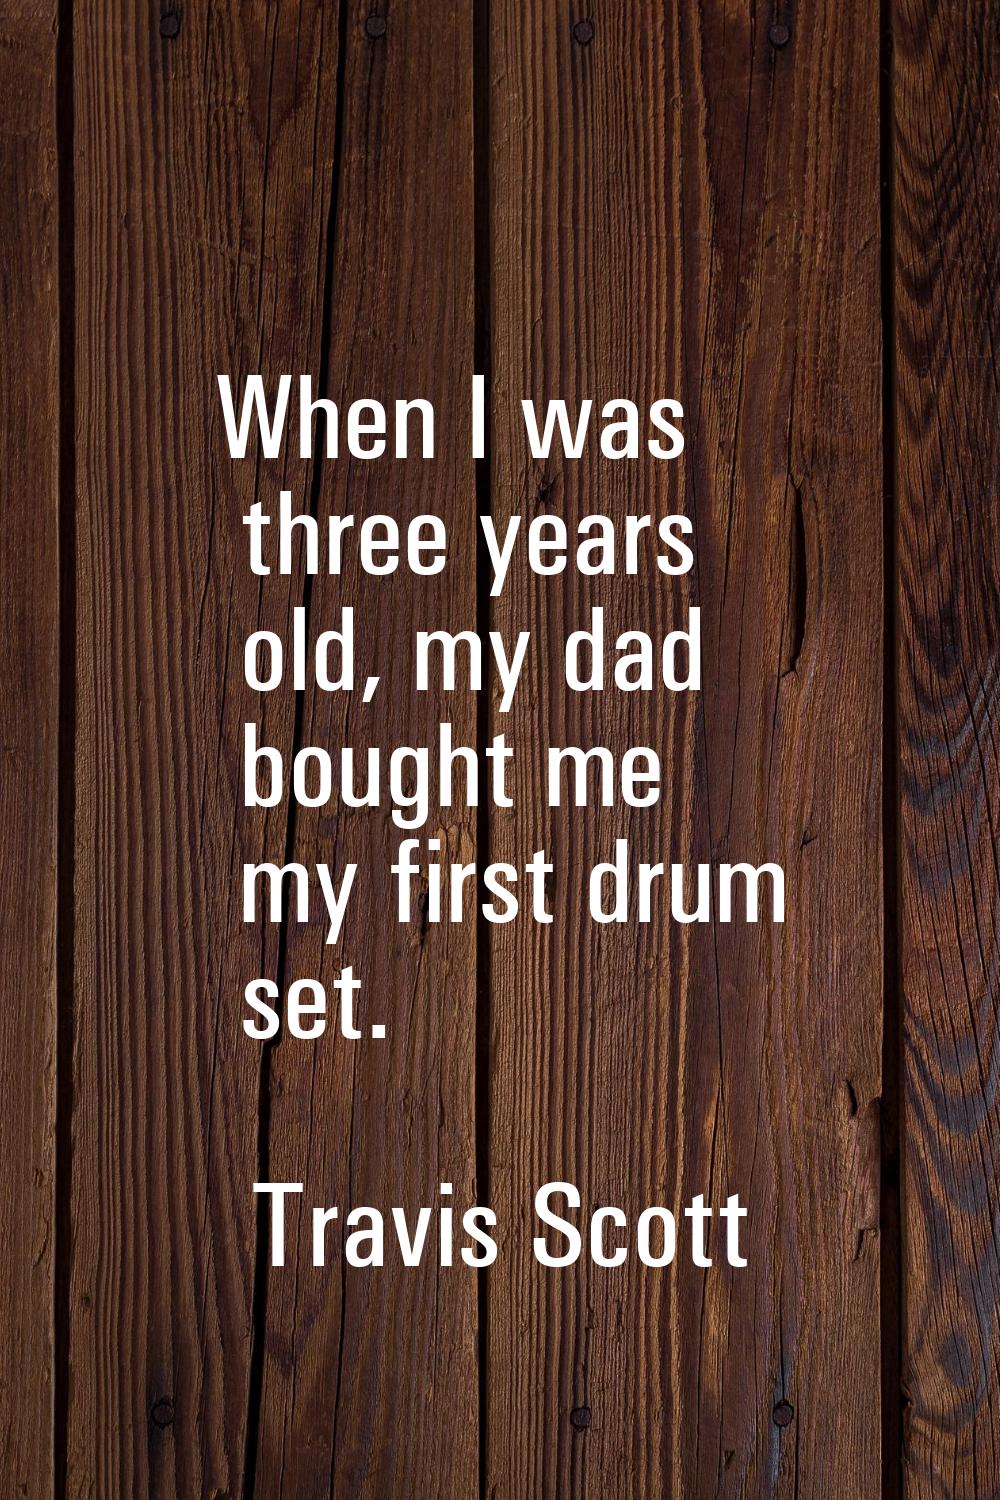 When I was three years old, my dad bought me my first drum set.